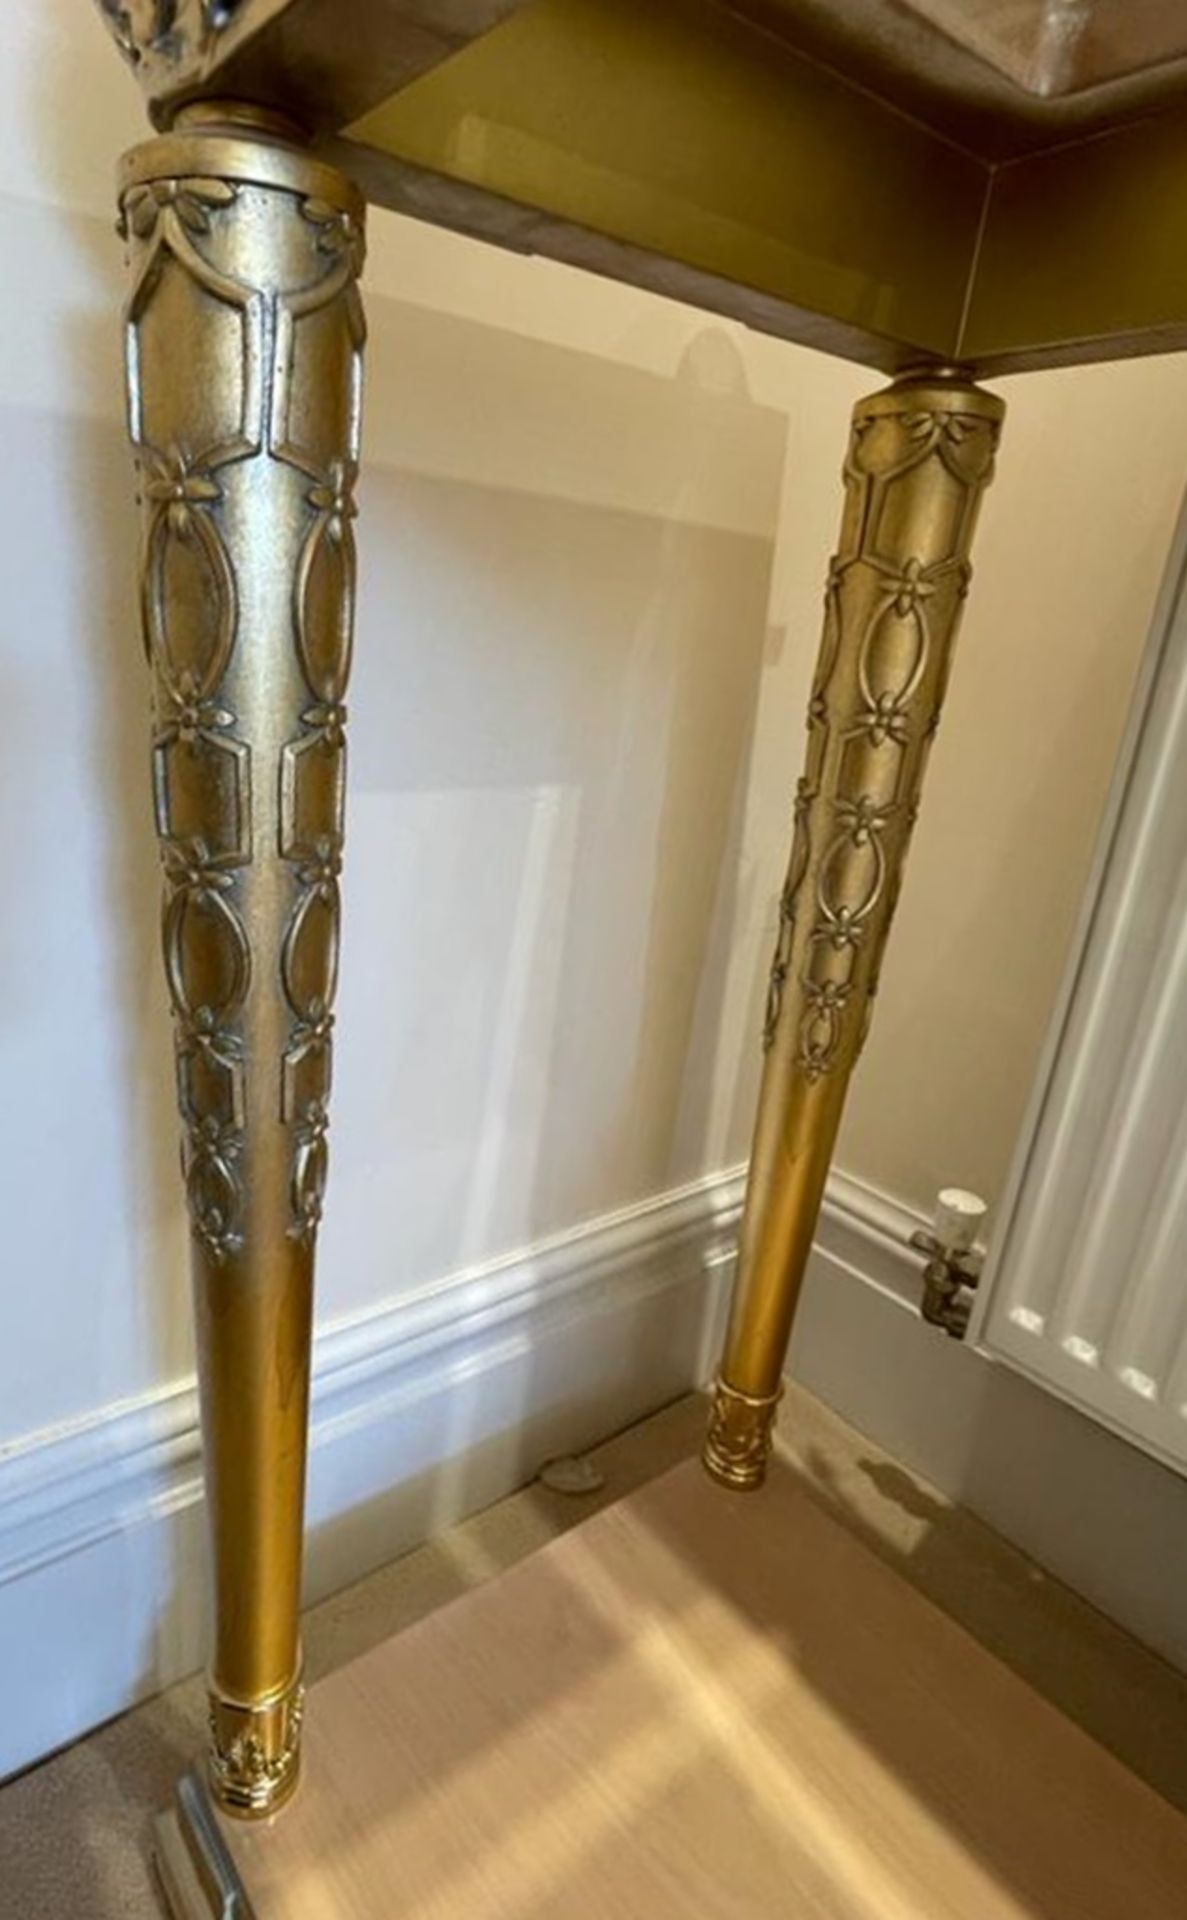 1 x Hand Carved Ornate Console Table Complimented With Birchwood Veneer, Golden Pillar Legs, - Image 9 of 10